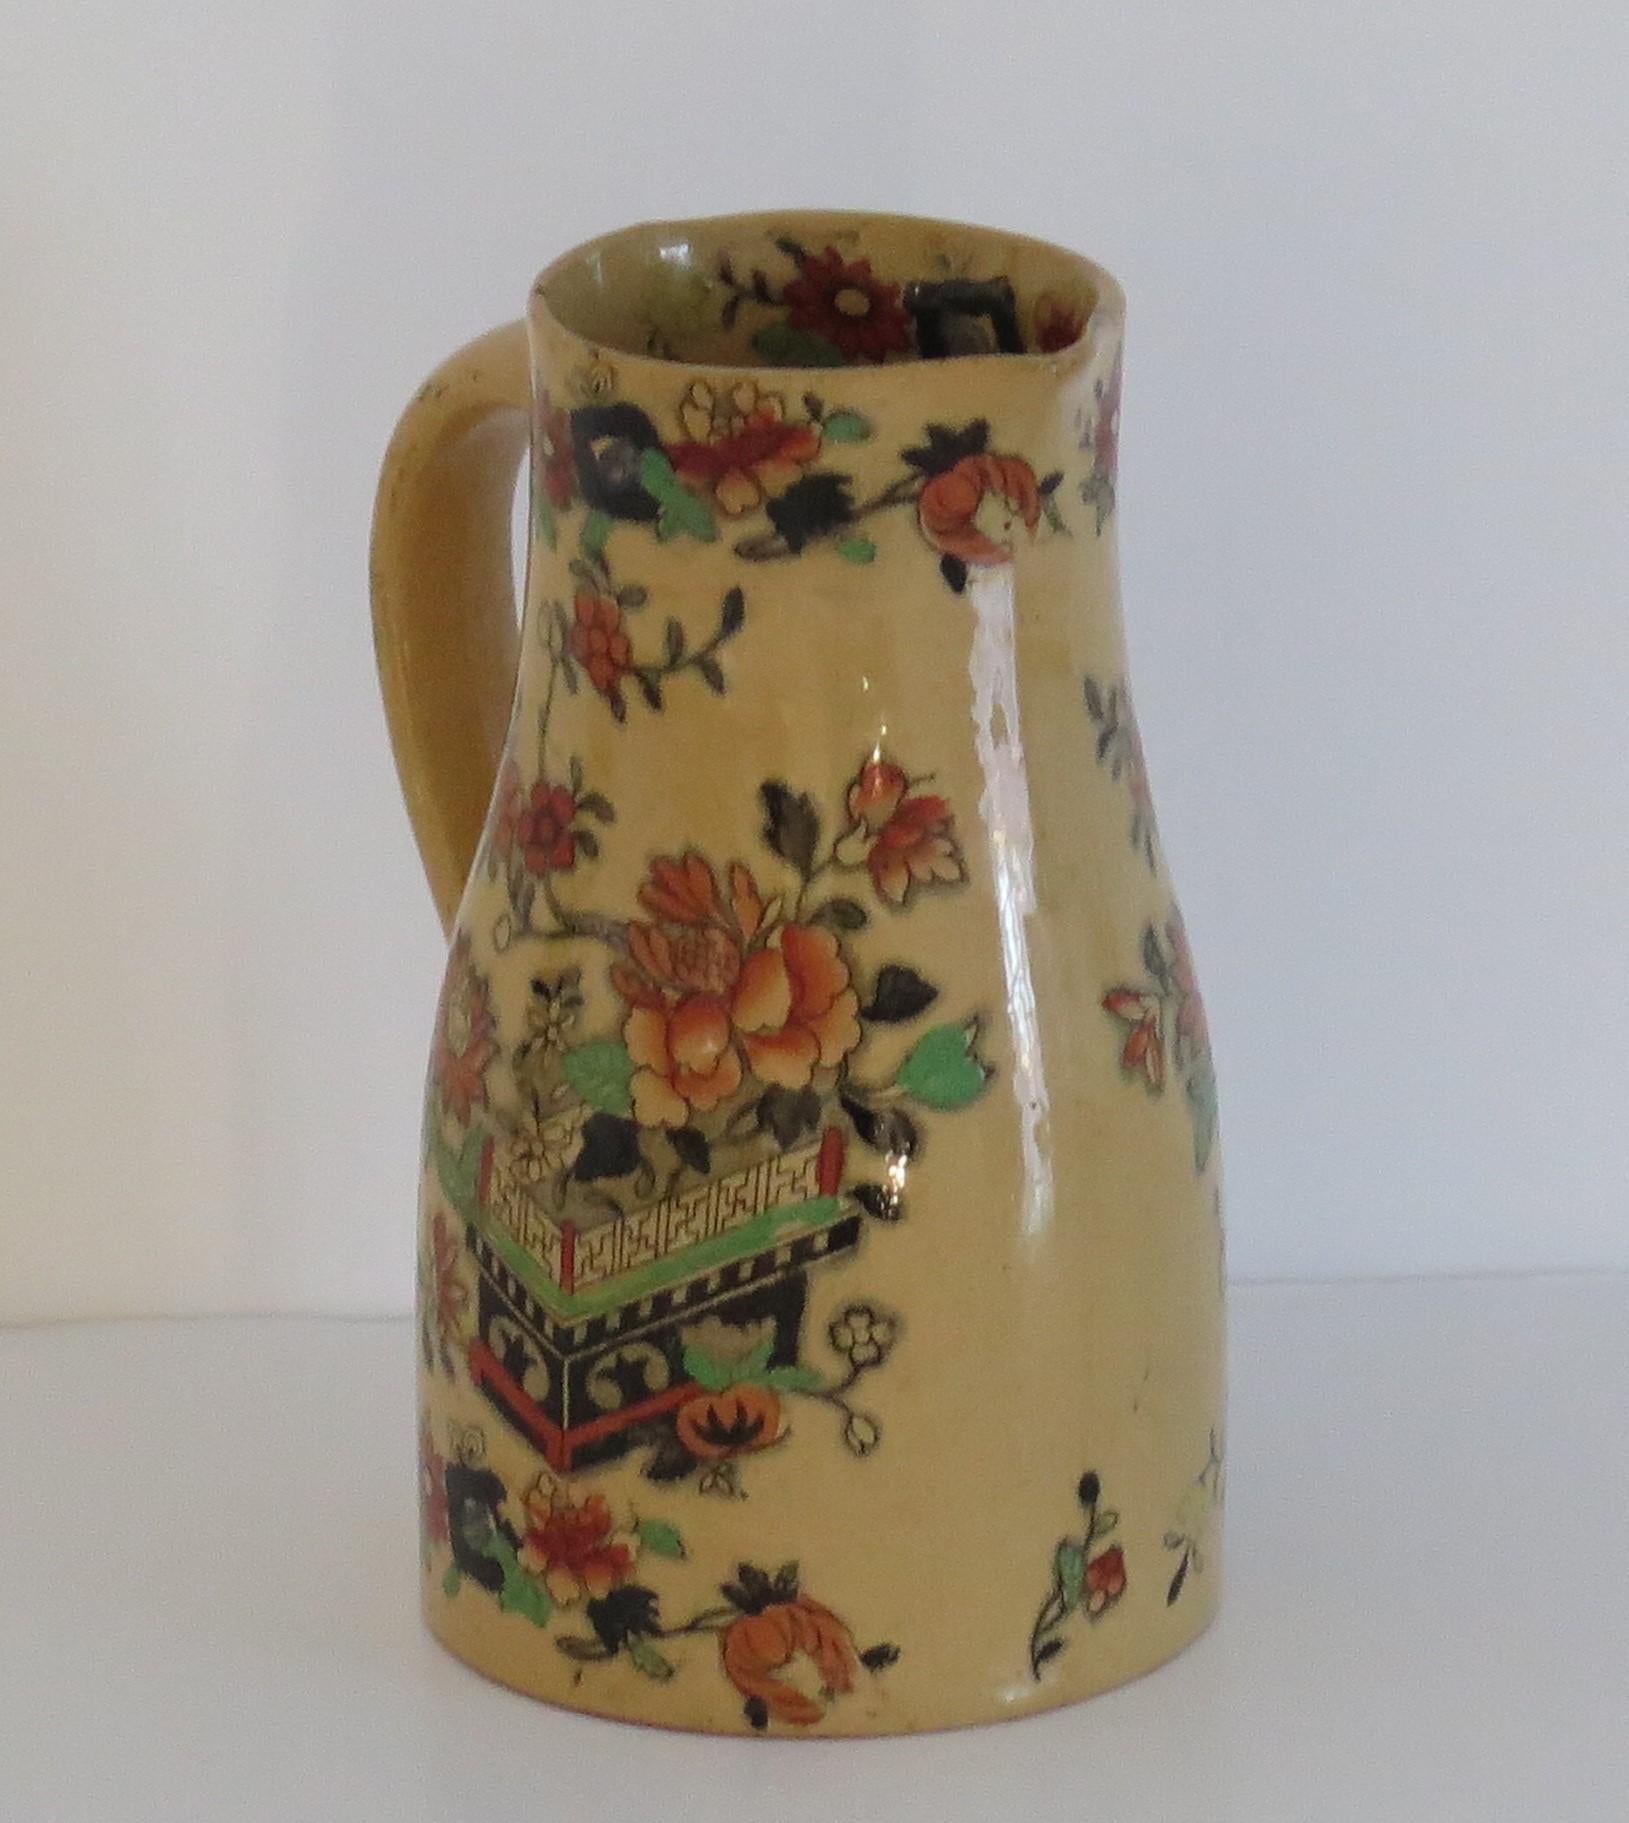 19th Century Mason's Ironstone Jug or Pitcher in Flower Box hand painted Pattern, circa 1840